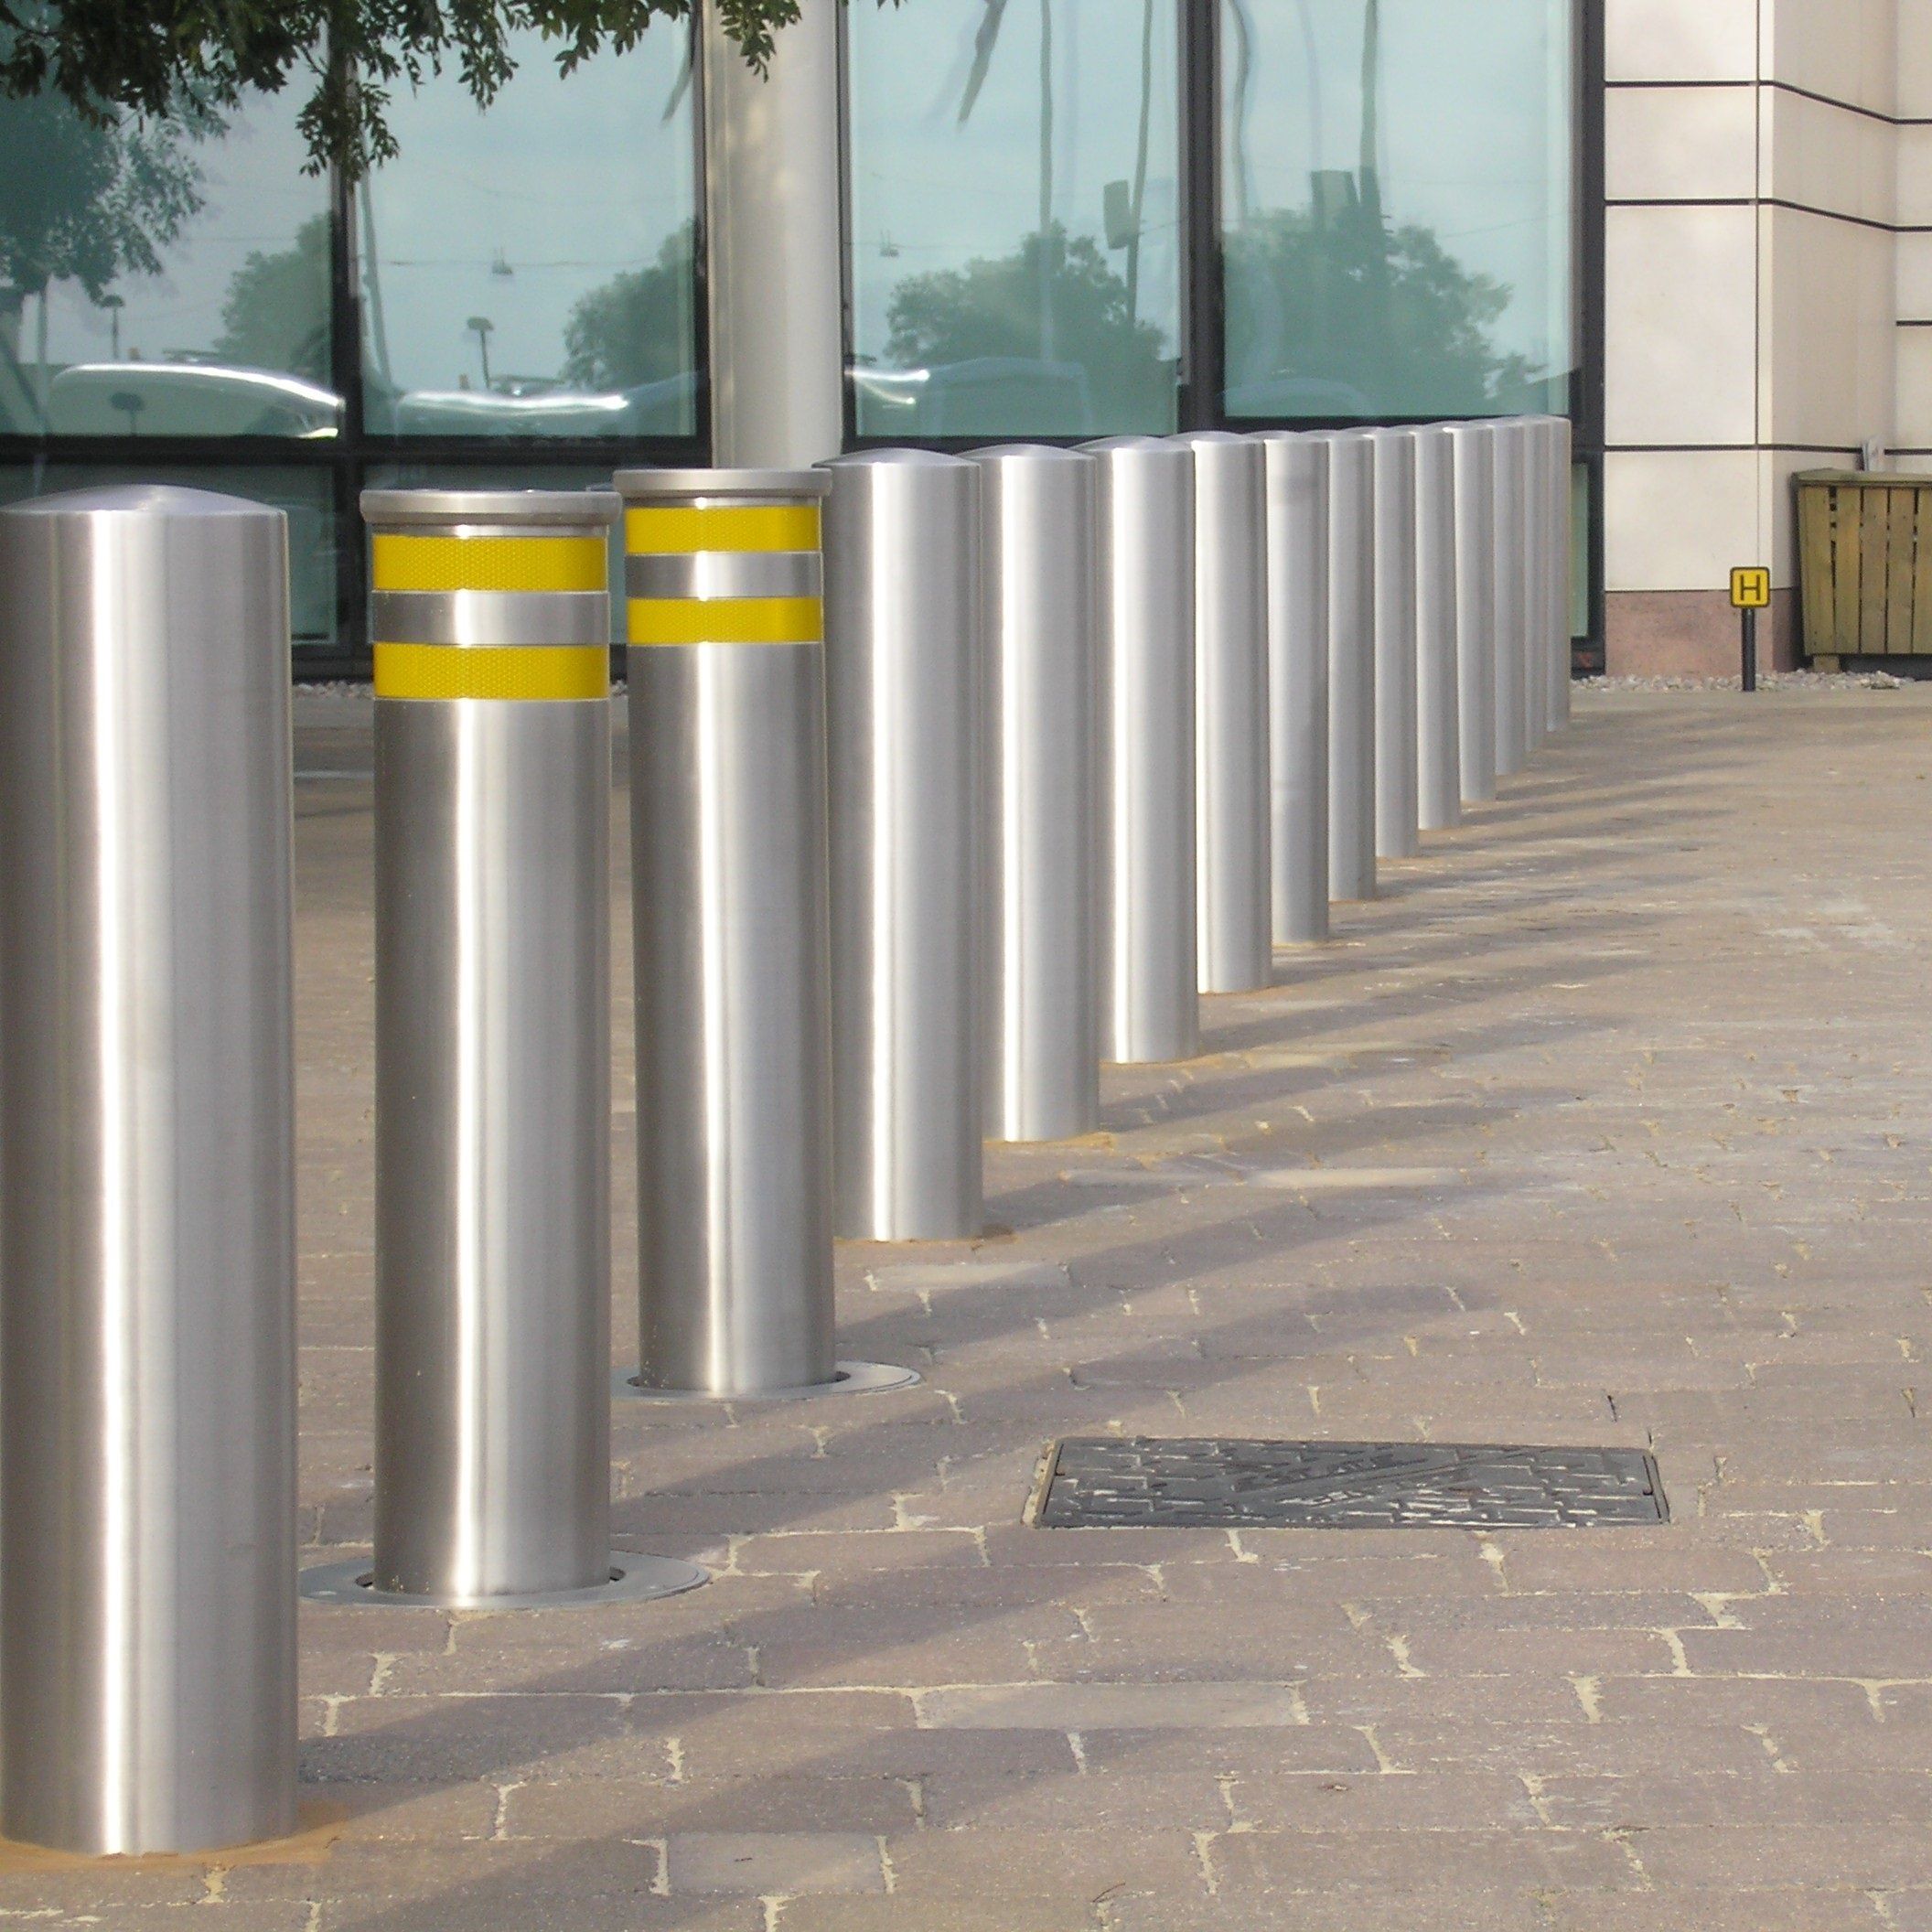 How to choose the right Bollard?